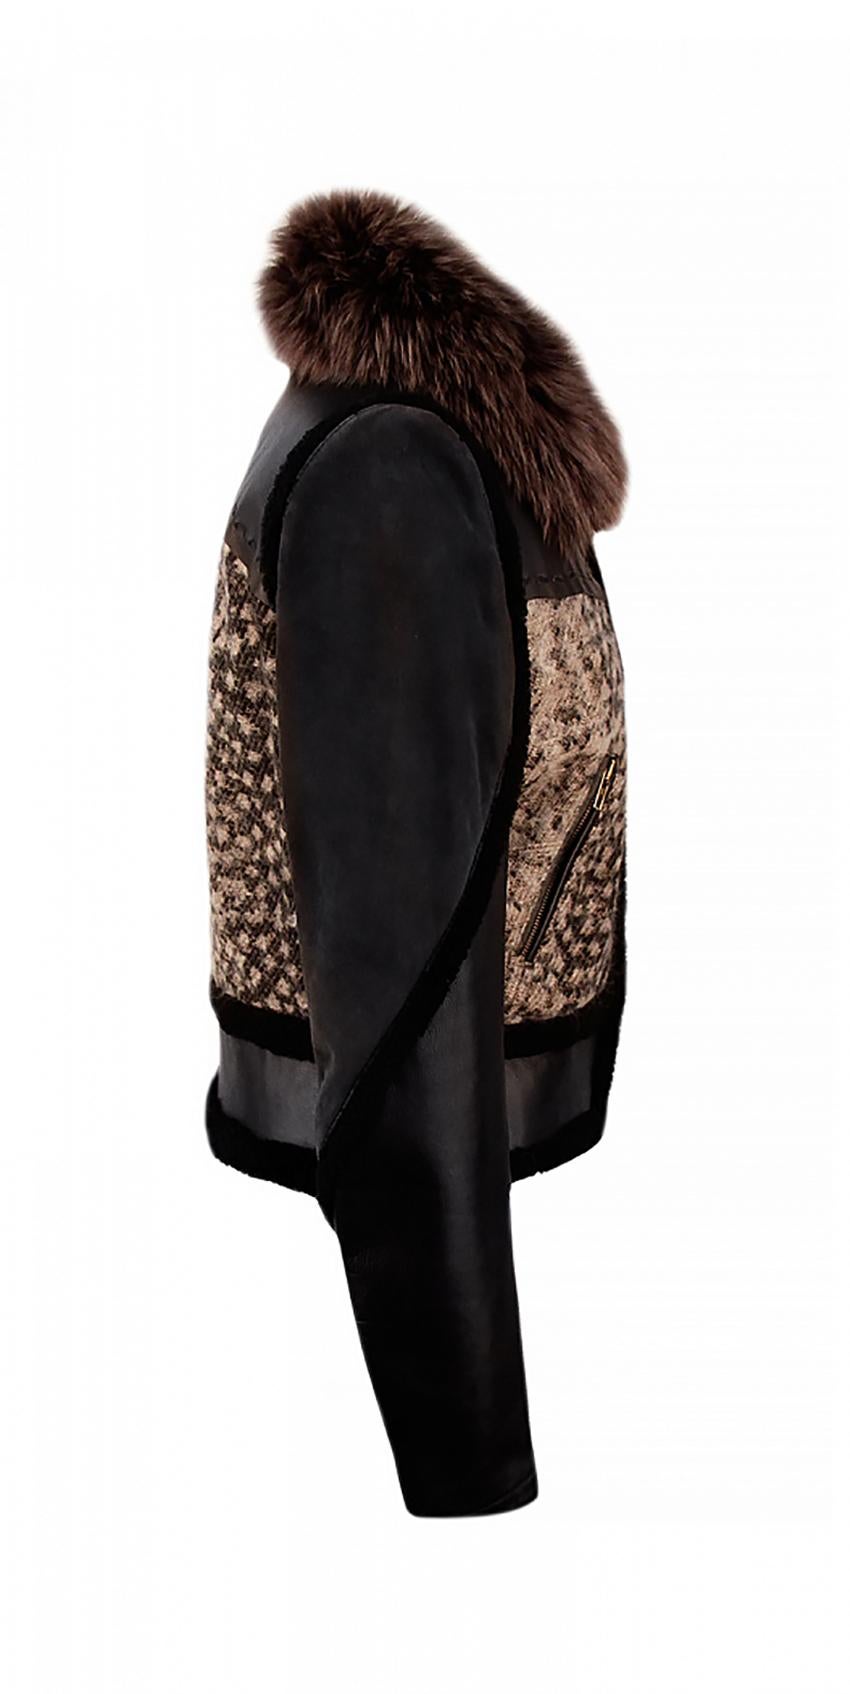 Avant-garde Roberto Cavalli jacket is made of leather with wool inserts and trimmed with fur. 
Two pockets, front zip closure.

2000s, Italy.
Content: wool, mohair, leather, fur

Size S

Bust approx. 33.8